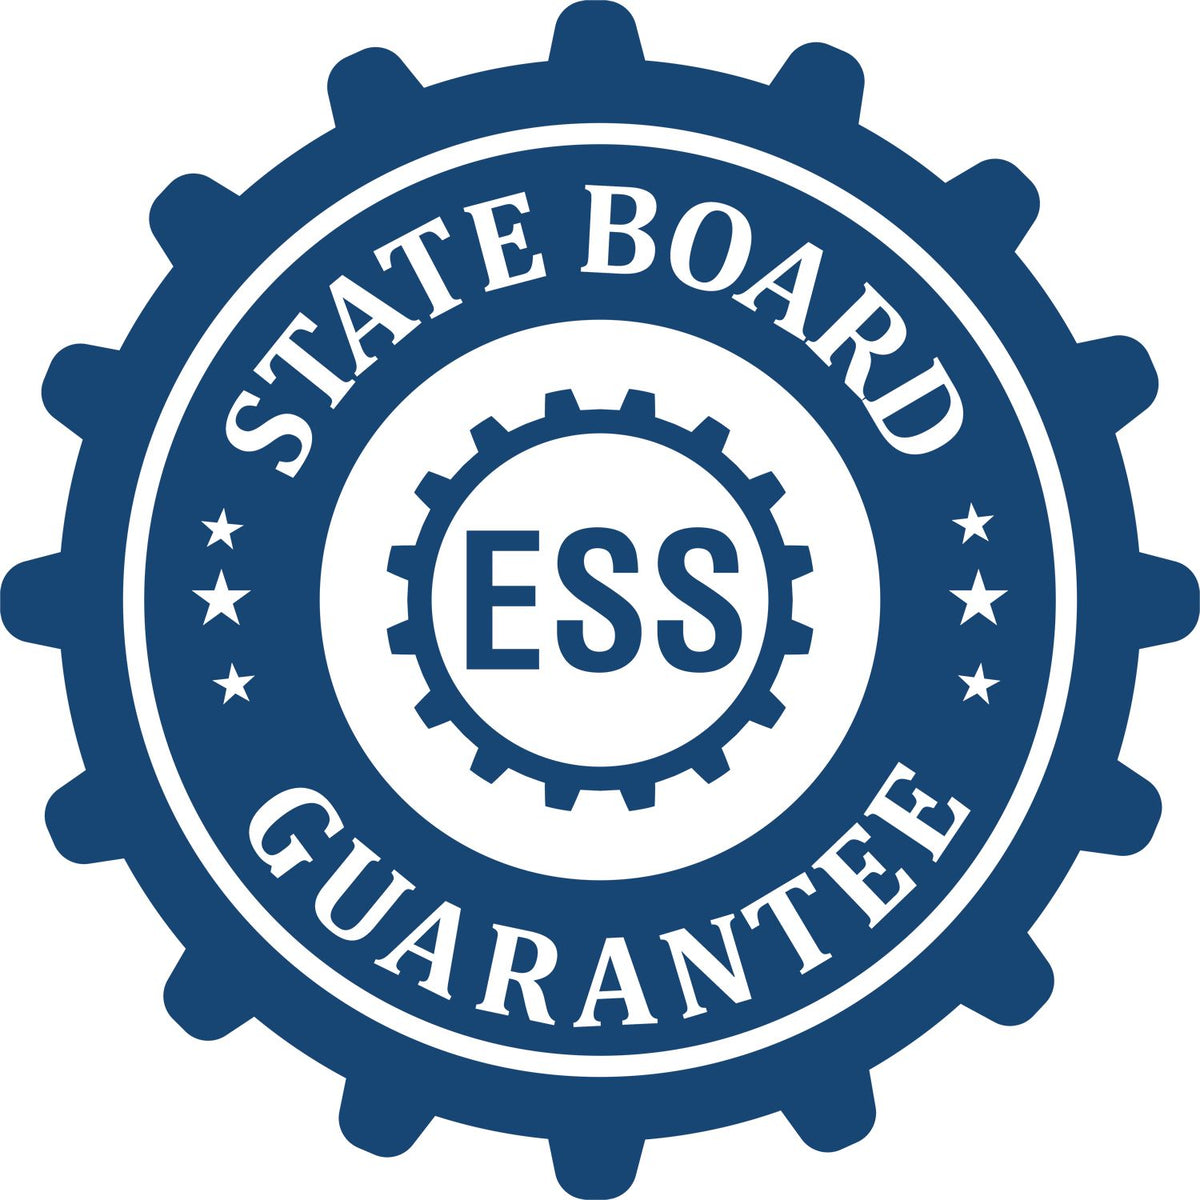 An emblem in a gear shape illustrating a state board guarantee for the Michigan Engineer Desk Seal product.